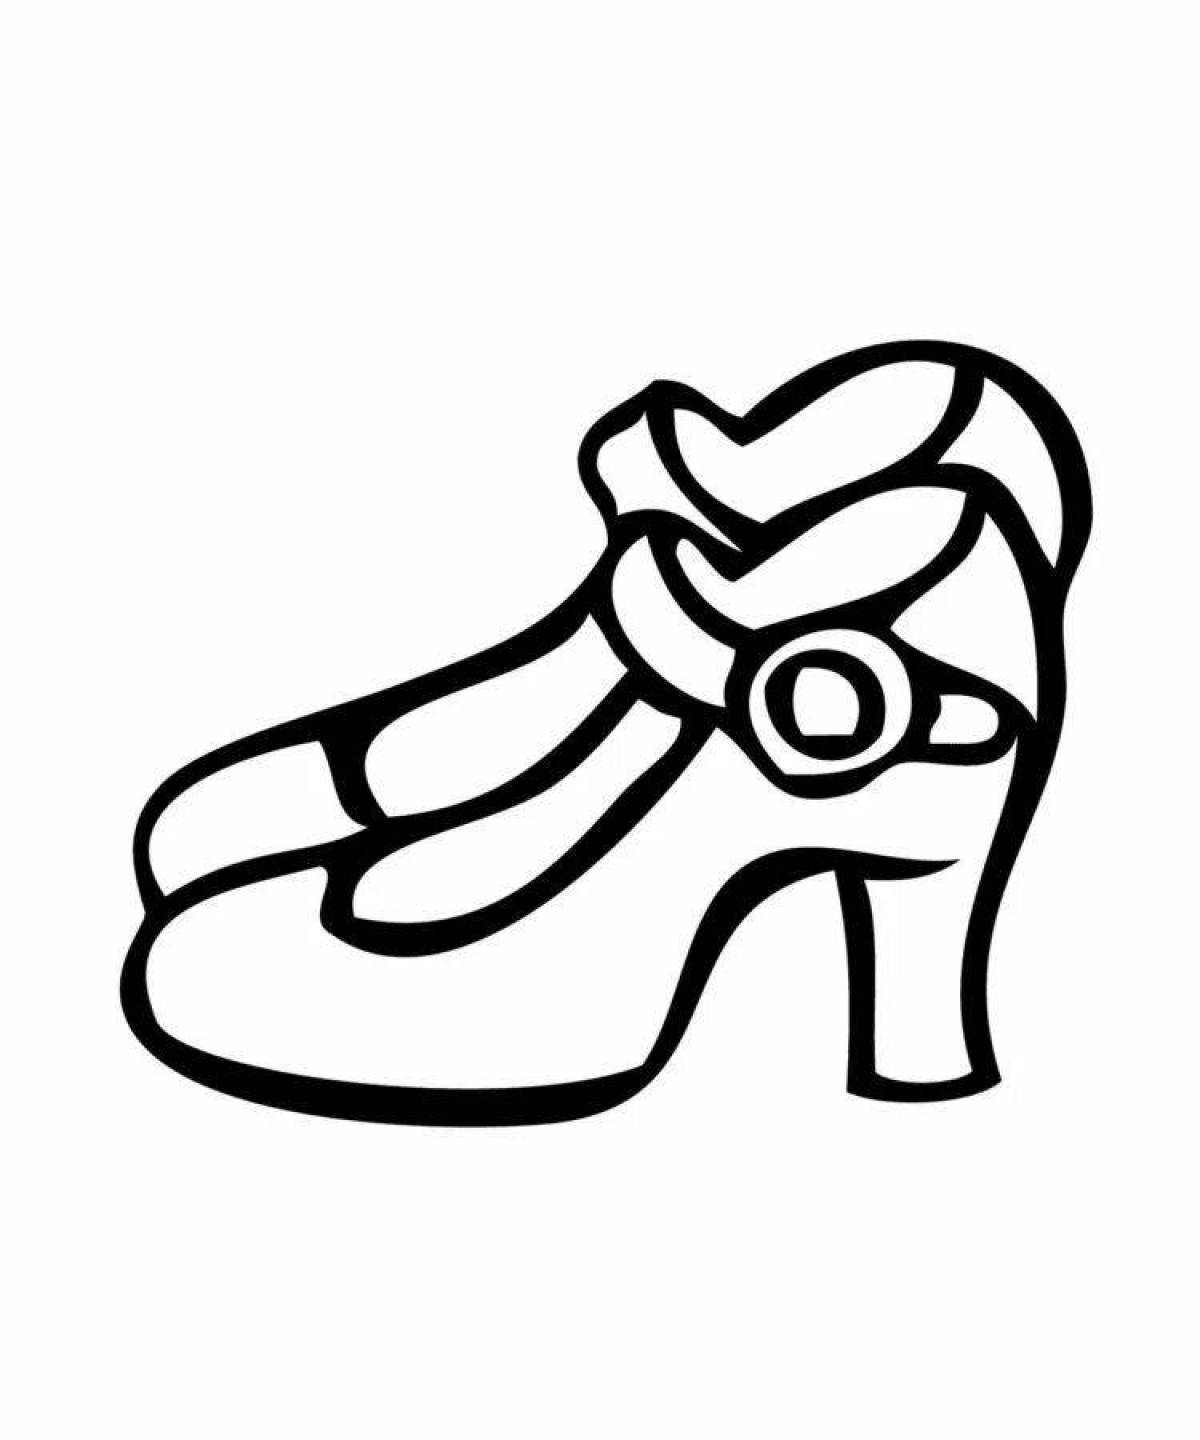 Coloring page stylish shoes for children